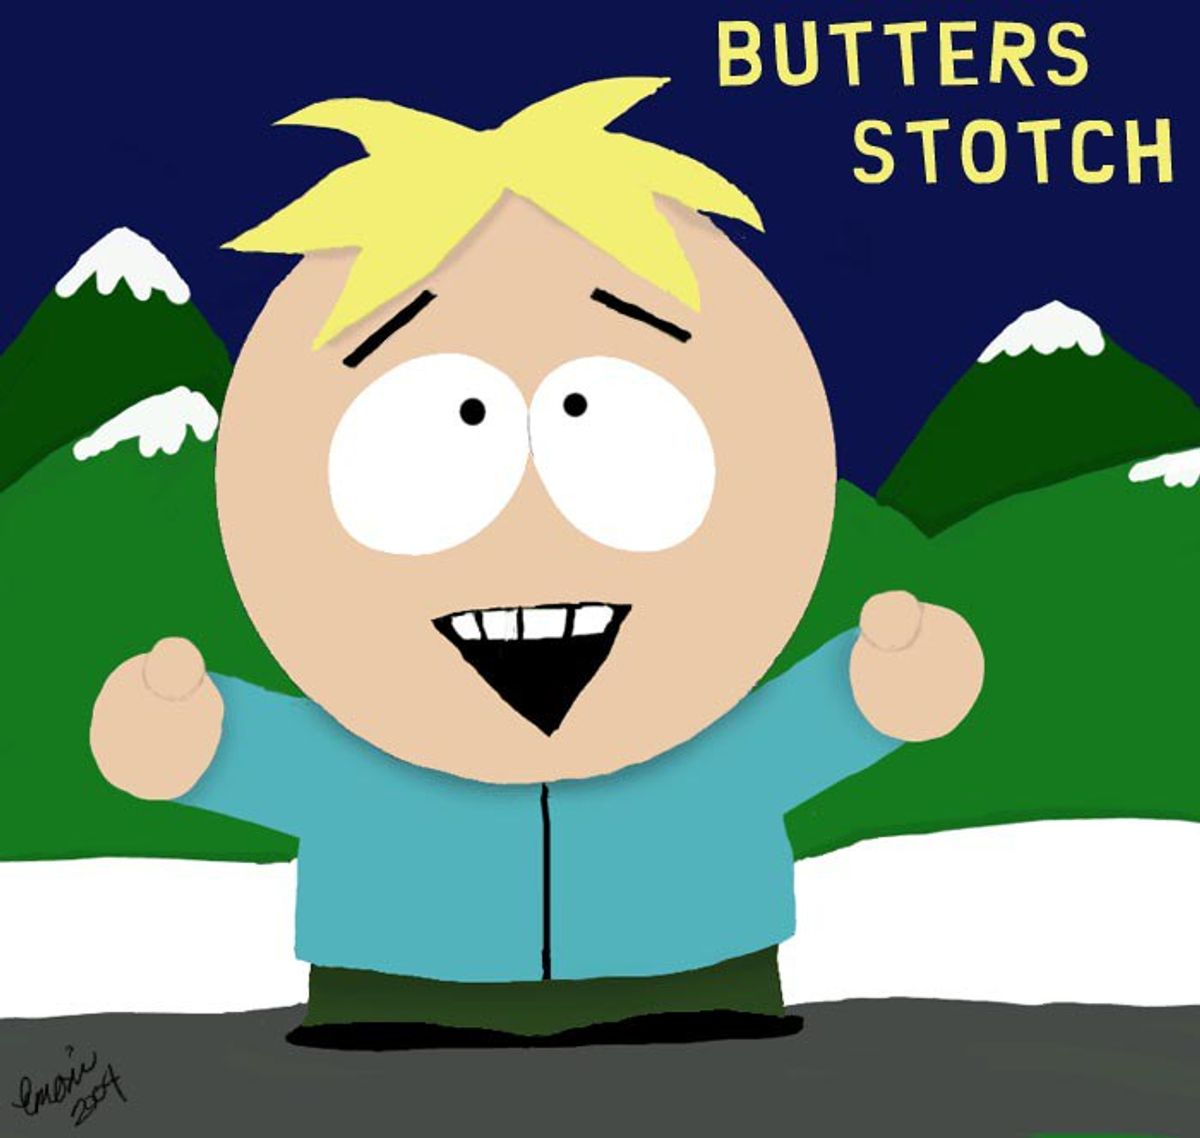 Why Butters Stotch Wins at Life